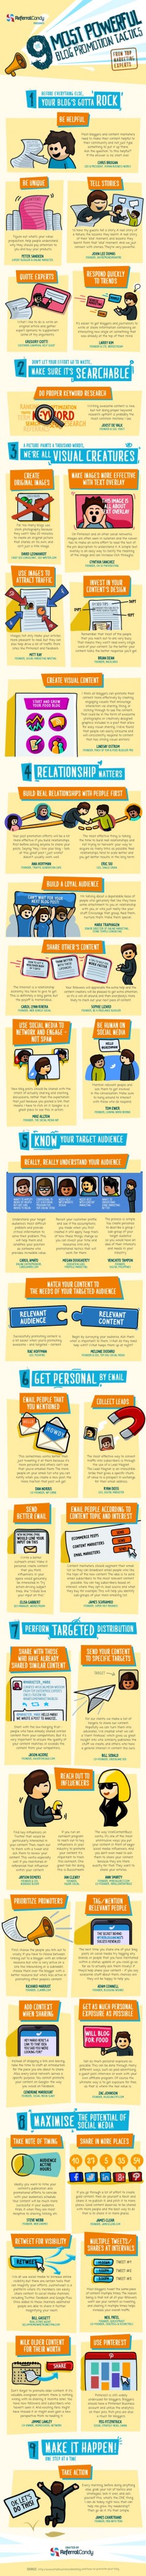 How to promote your blog - #Marketing #infographic #blogging #socialmedia